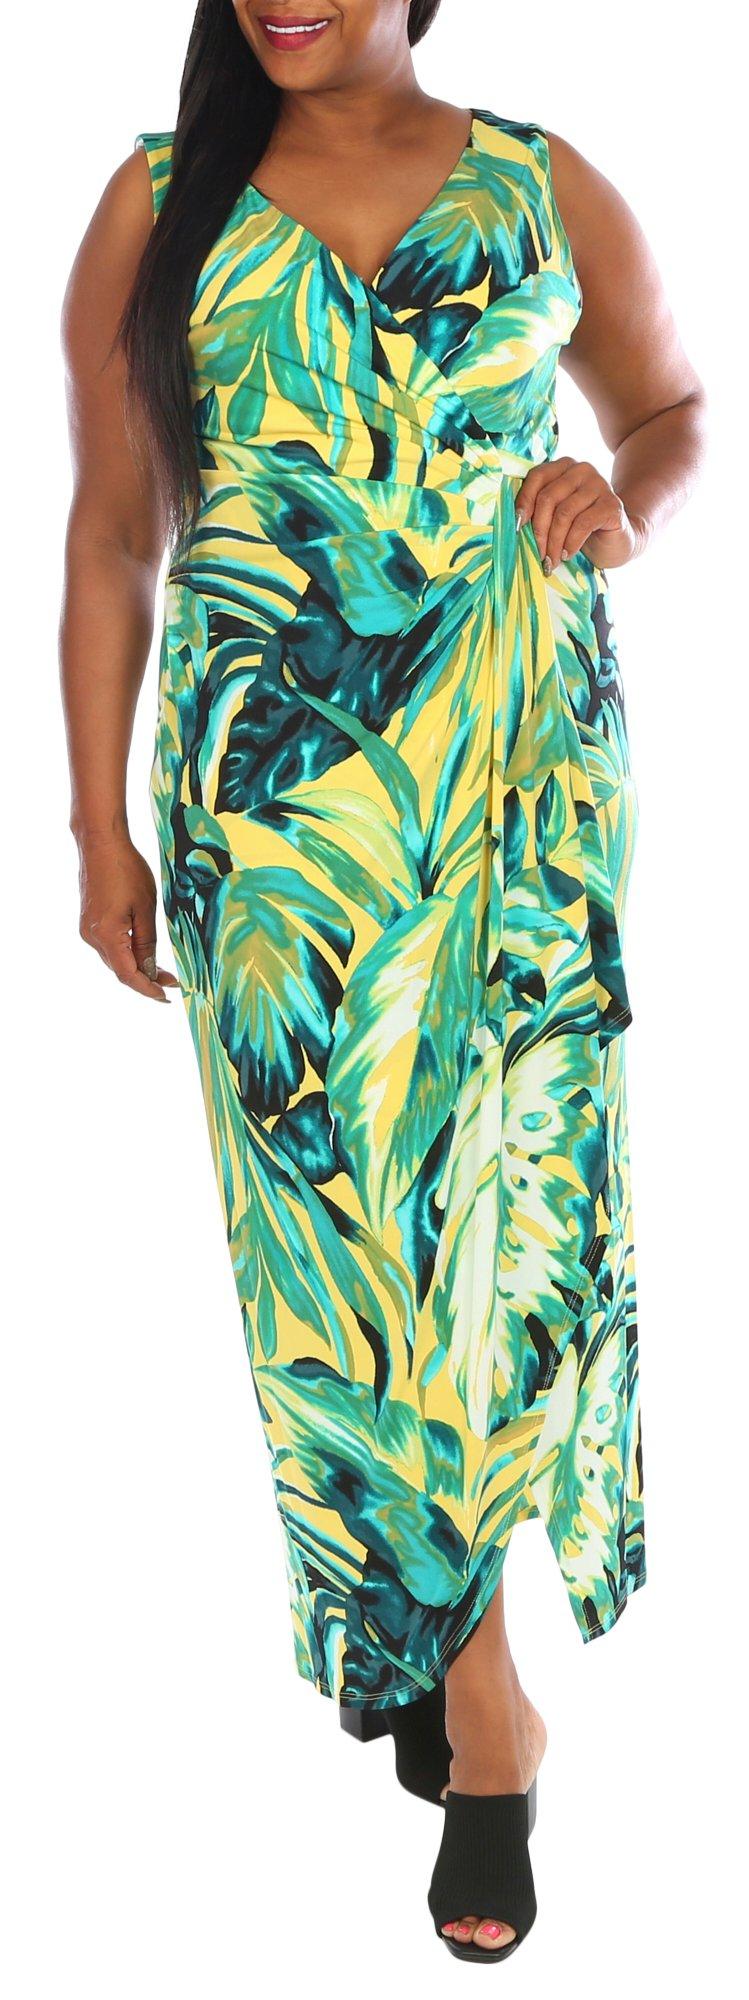 Connected Apparel Womens Tropical Sleeveless Dress